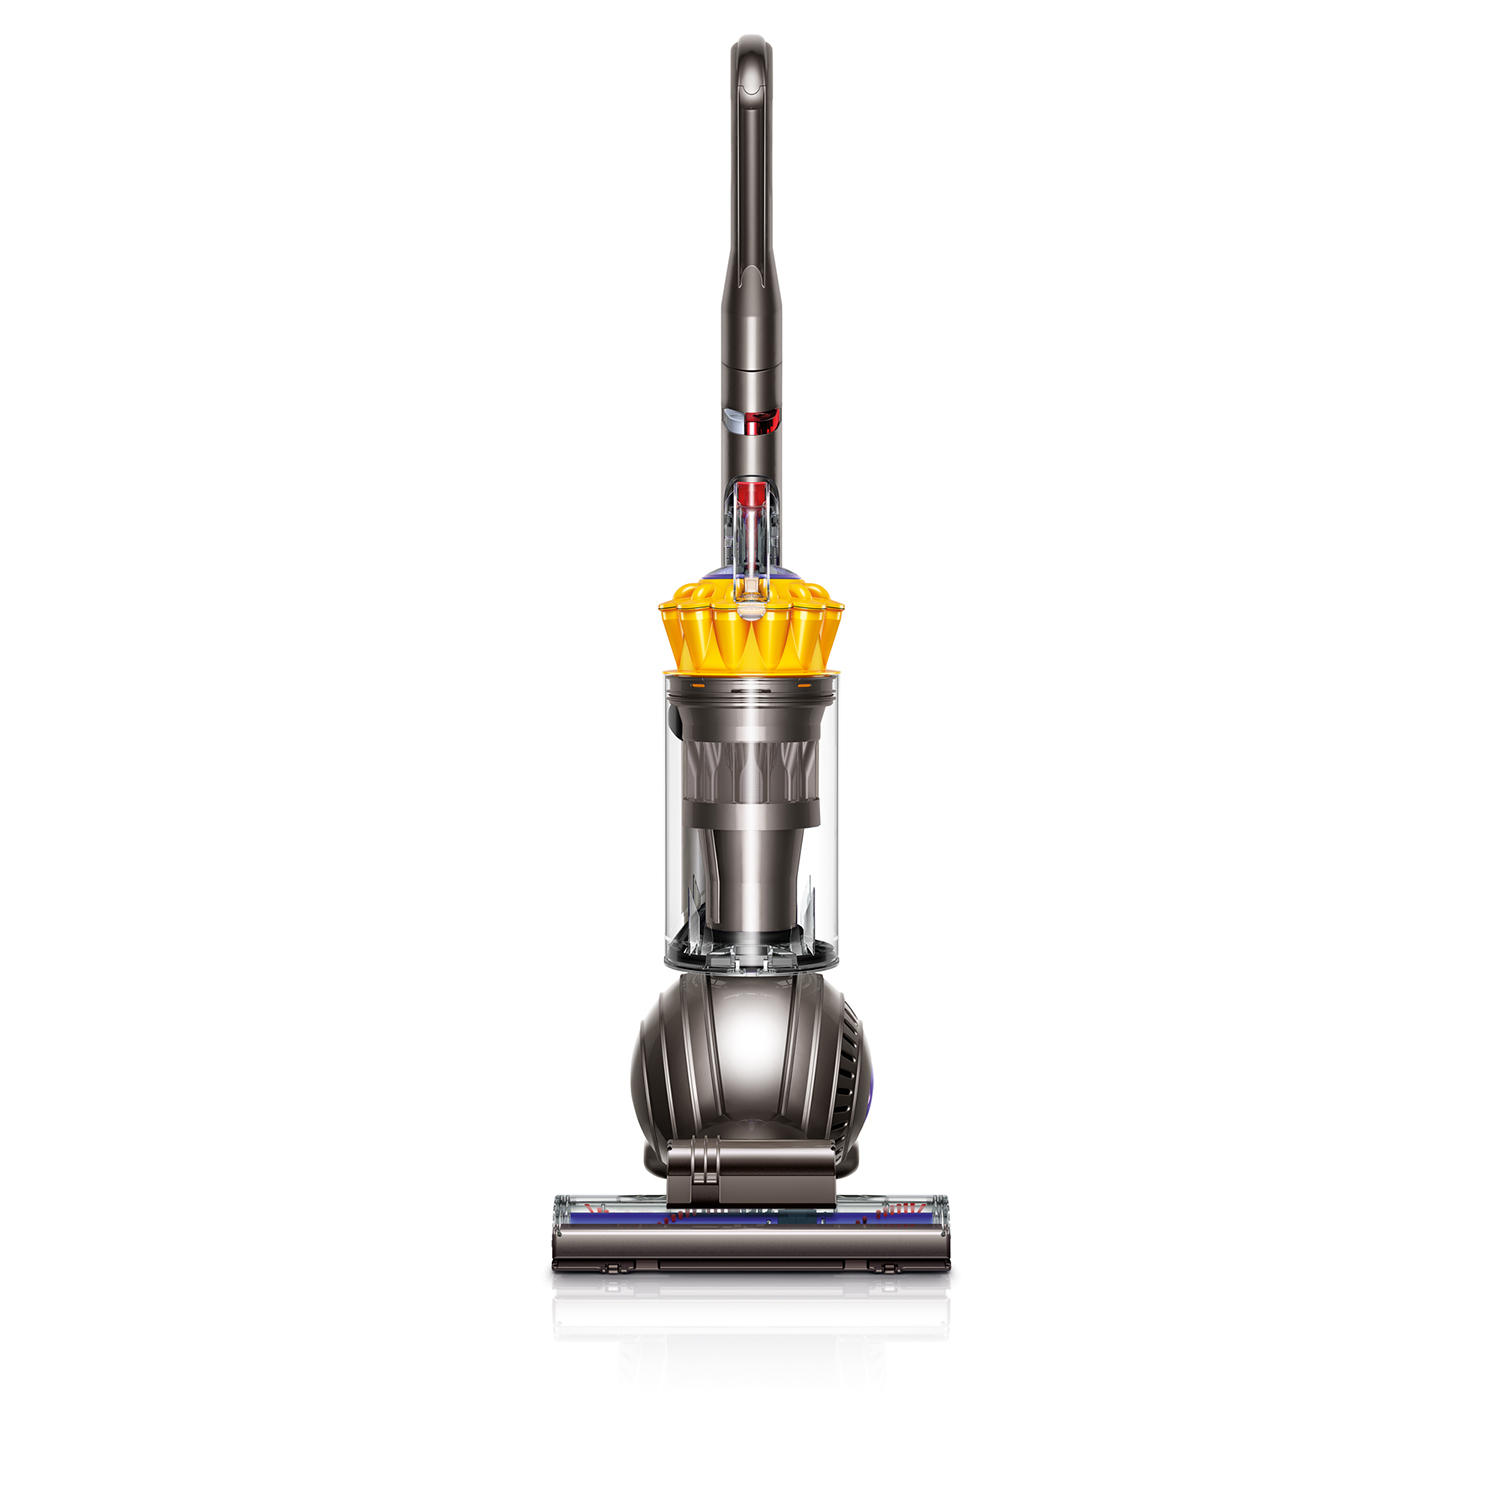 UPC 885609004723 product image for Dyson Ball Total Clean | upcitemdb.com